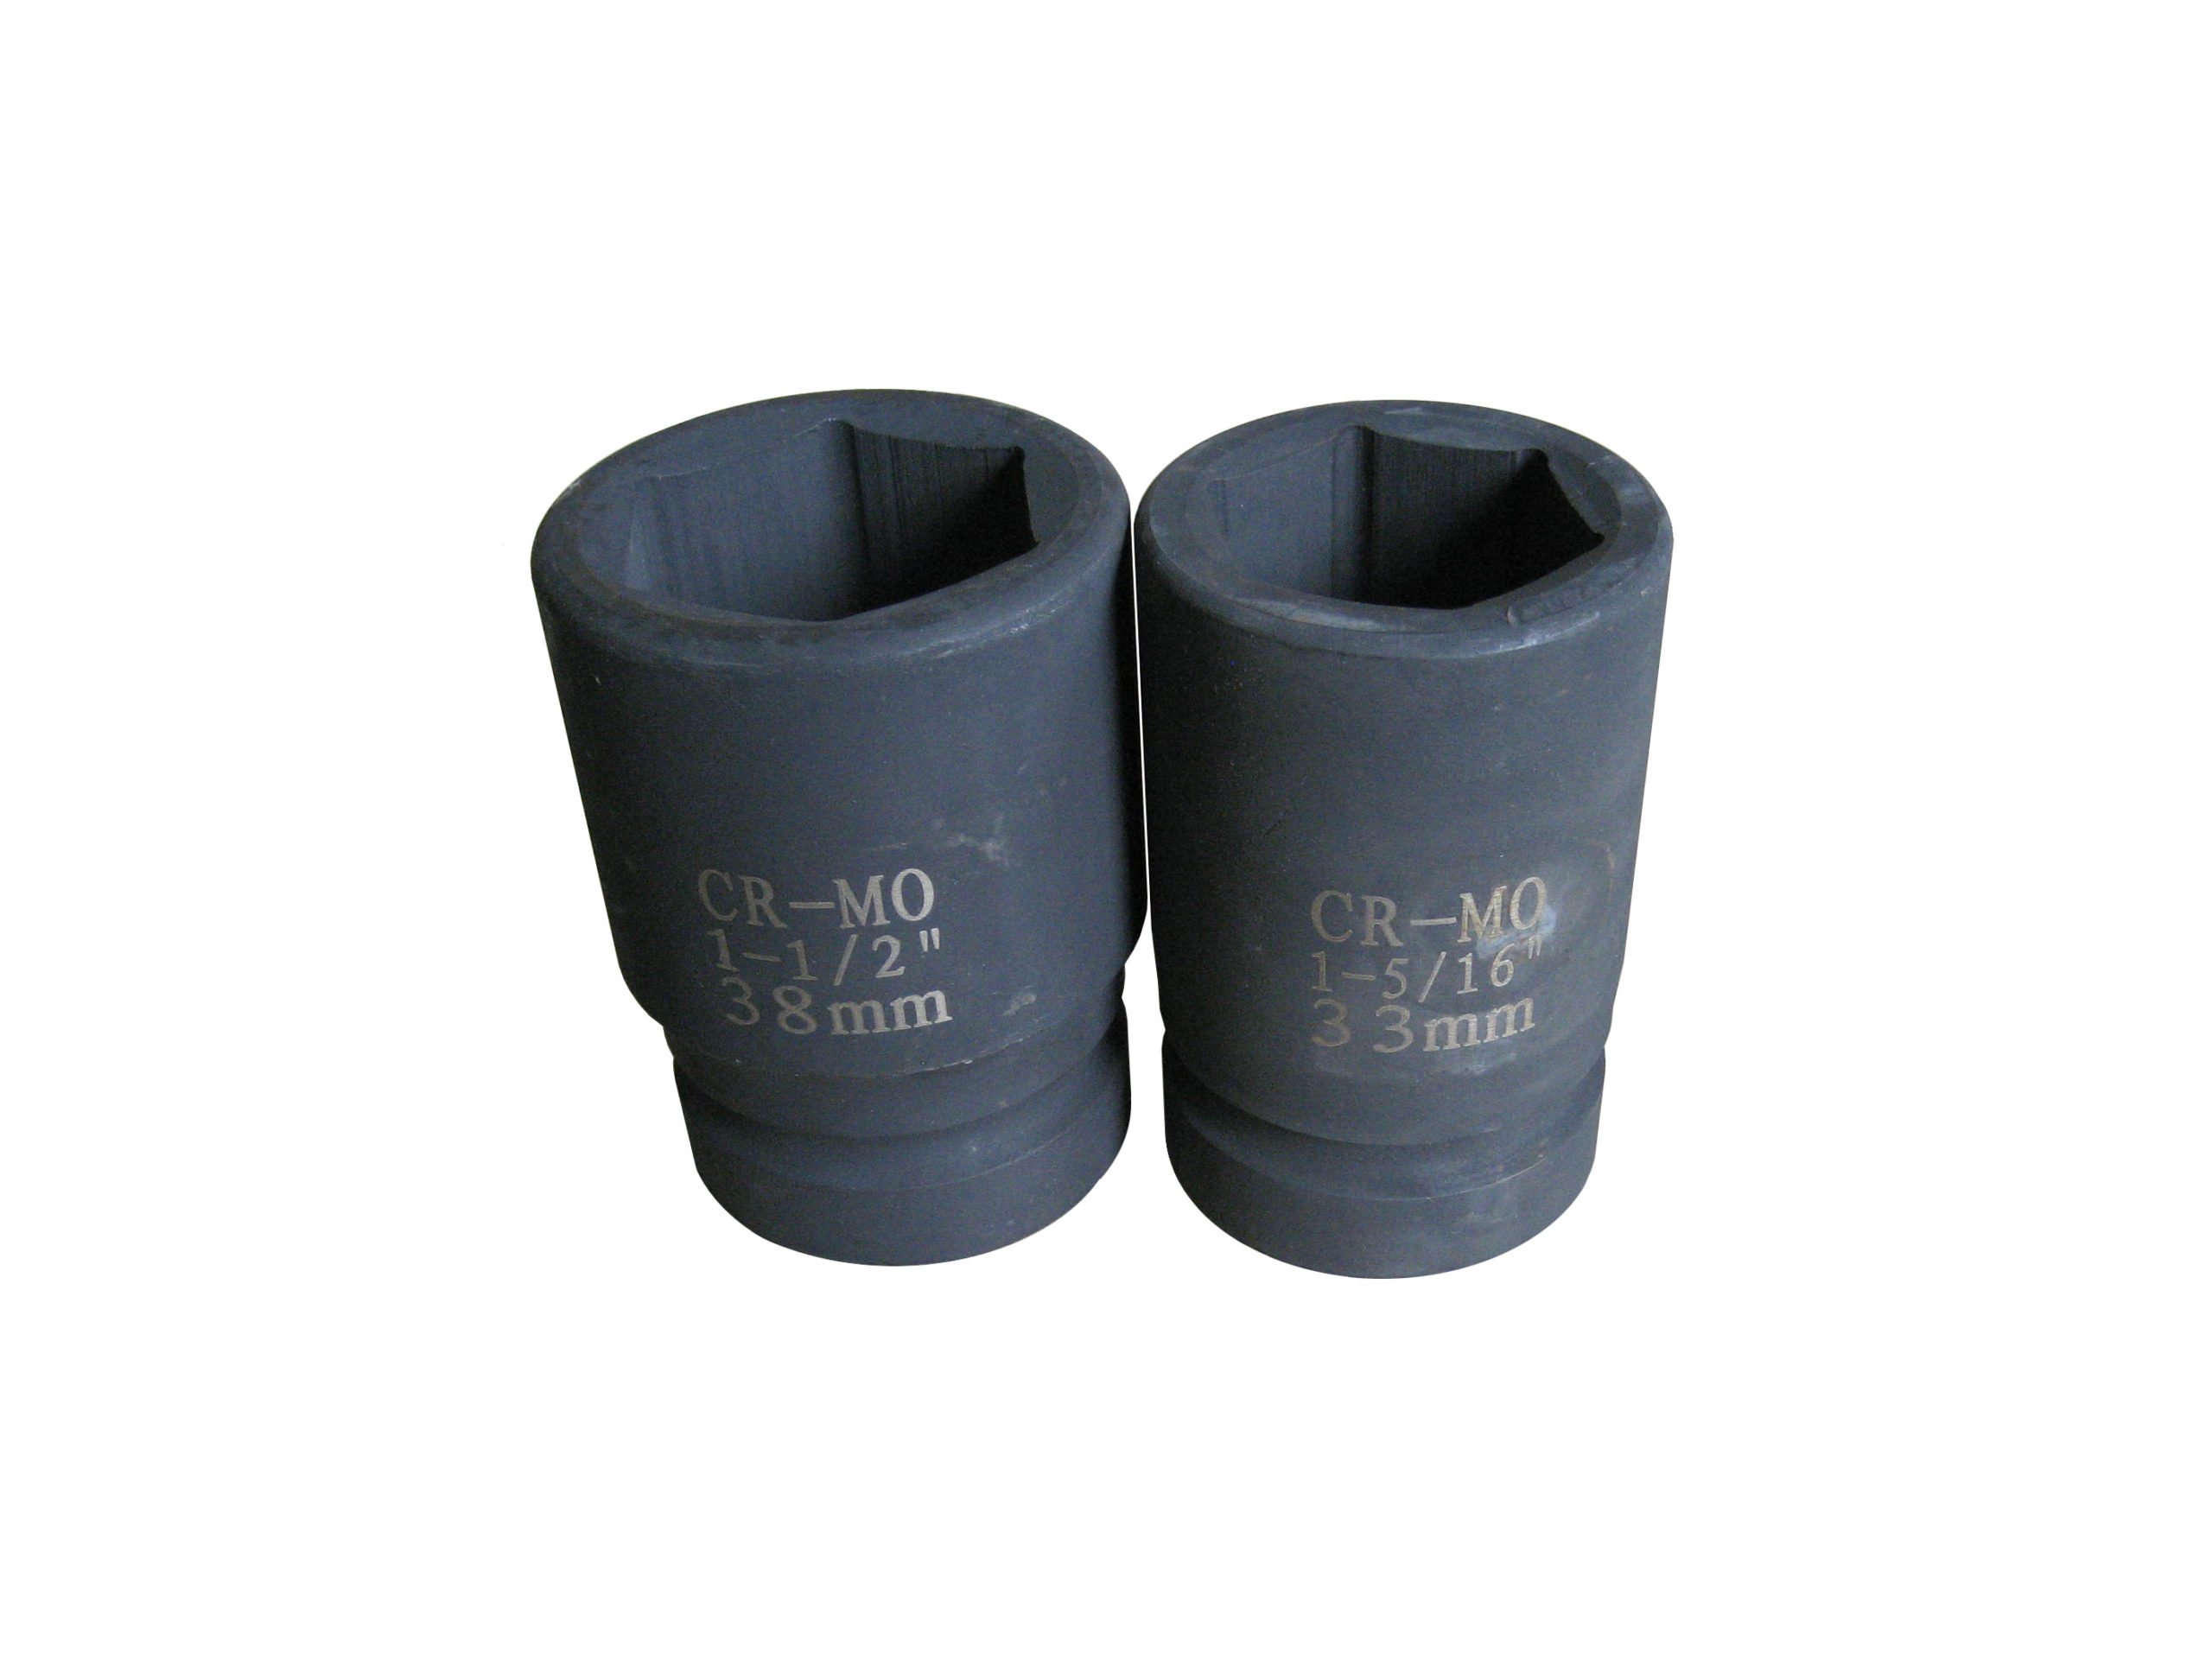 REPLACEMENT SOCKET FOR NUT BUSTER TOOL 1-1/2"